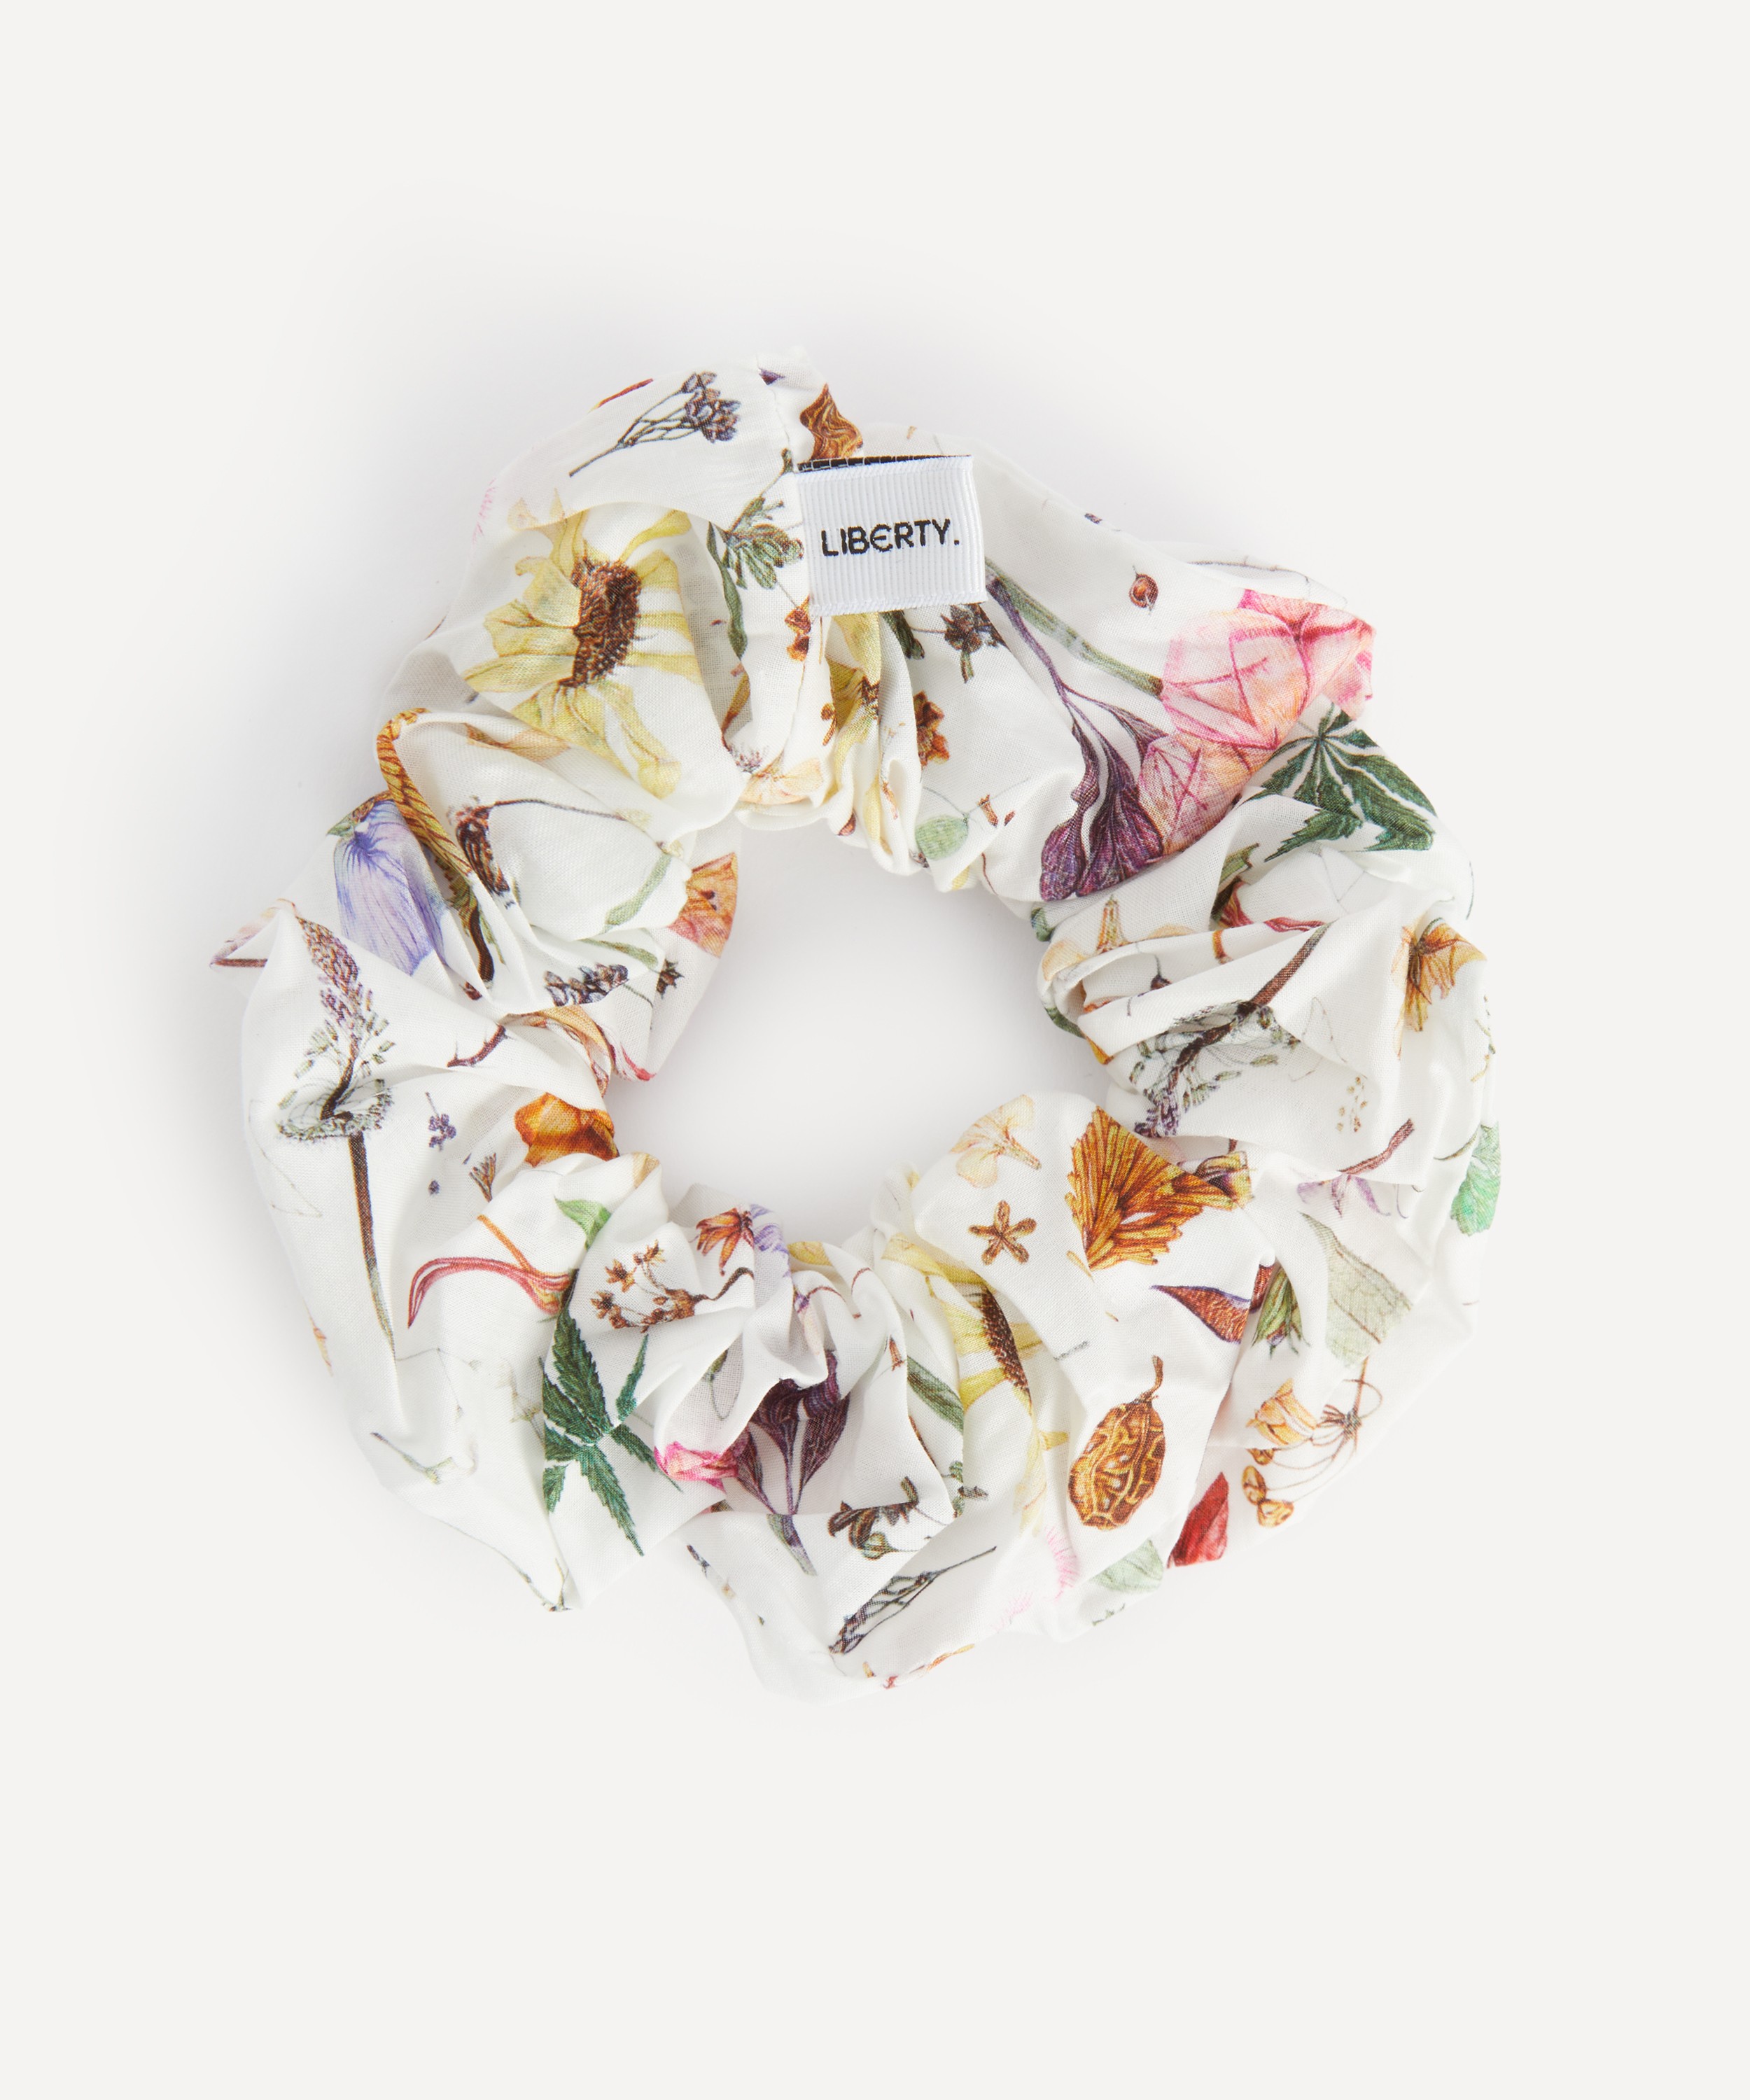 Liberty - Floral Eve Tana Lawn™ Cotton Hair Scrunchie image number 1